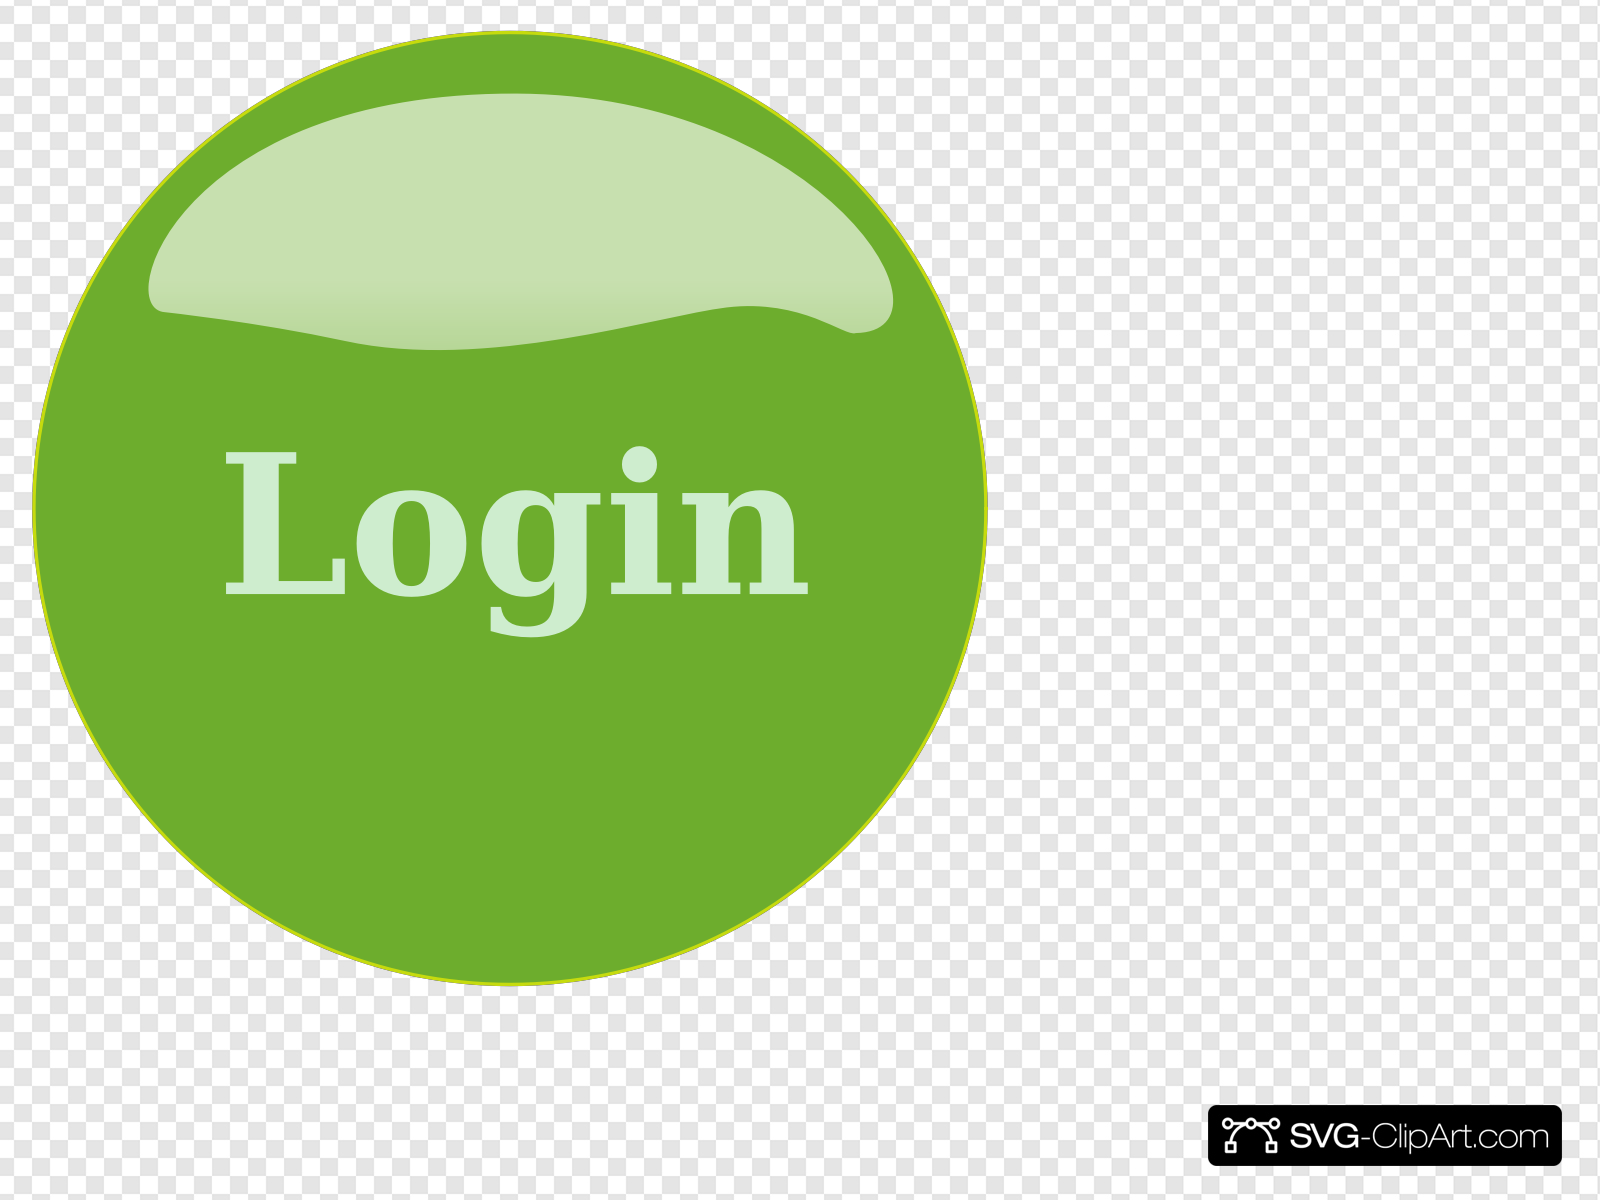 Login Sheboo Button Clip art, Icon and SVG